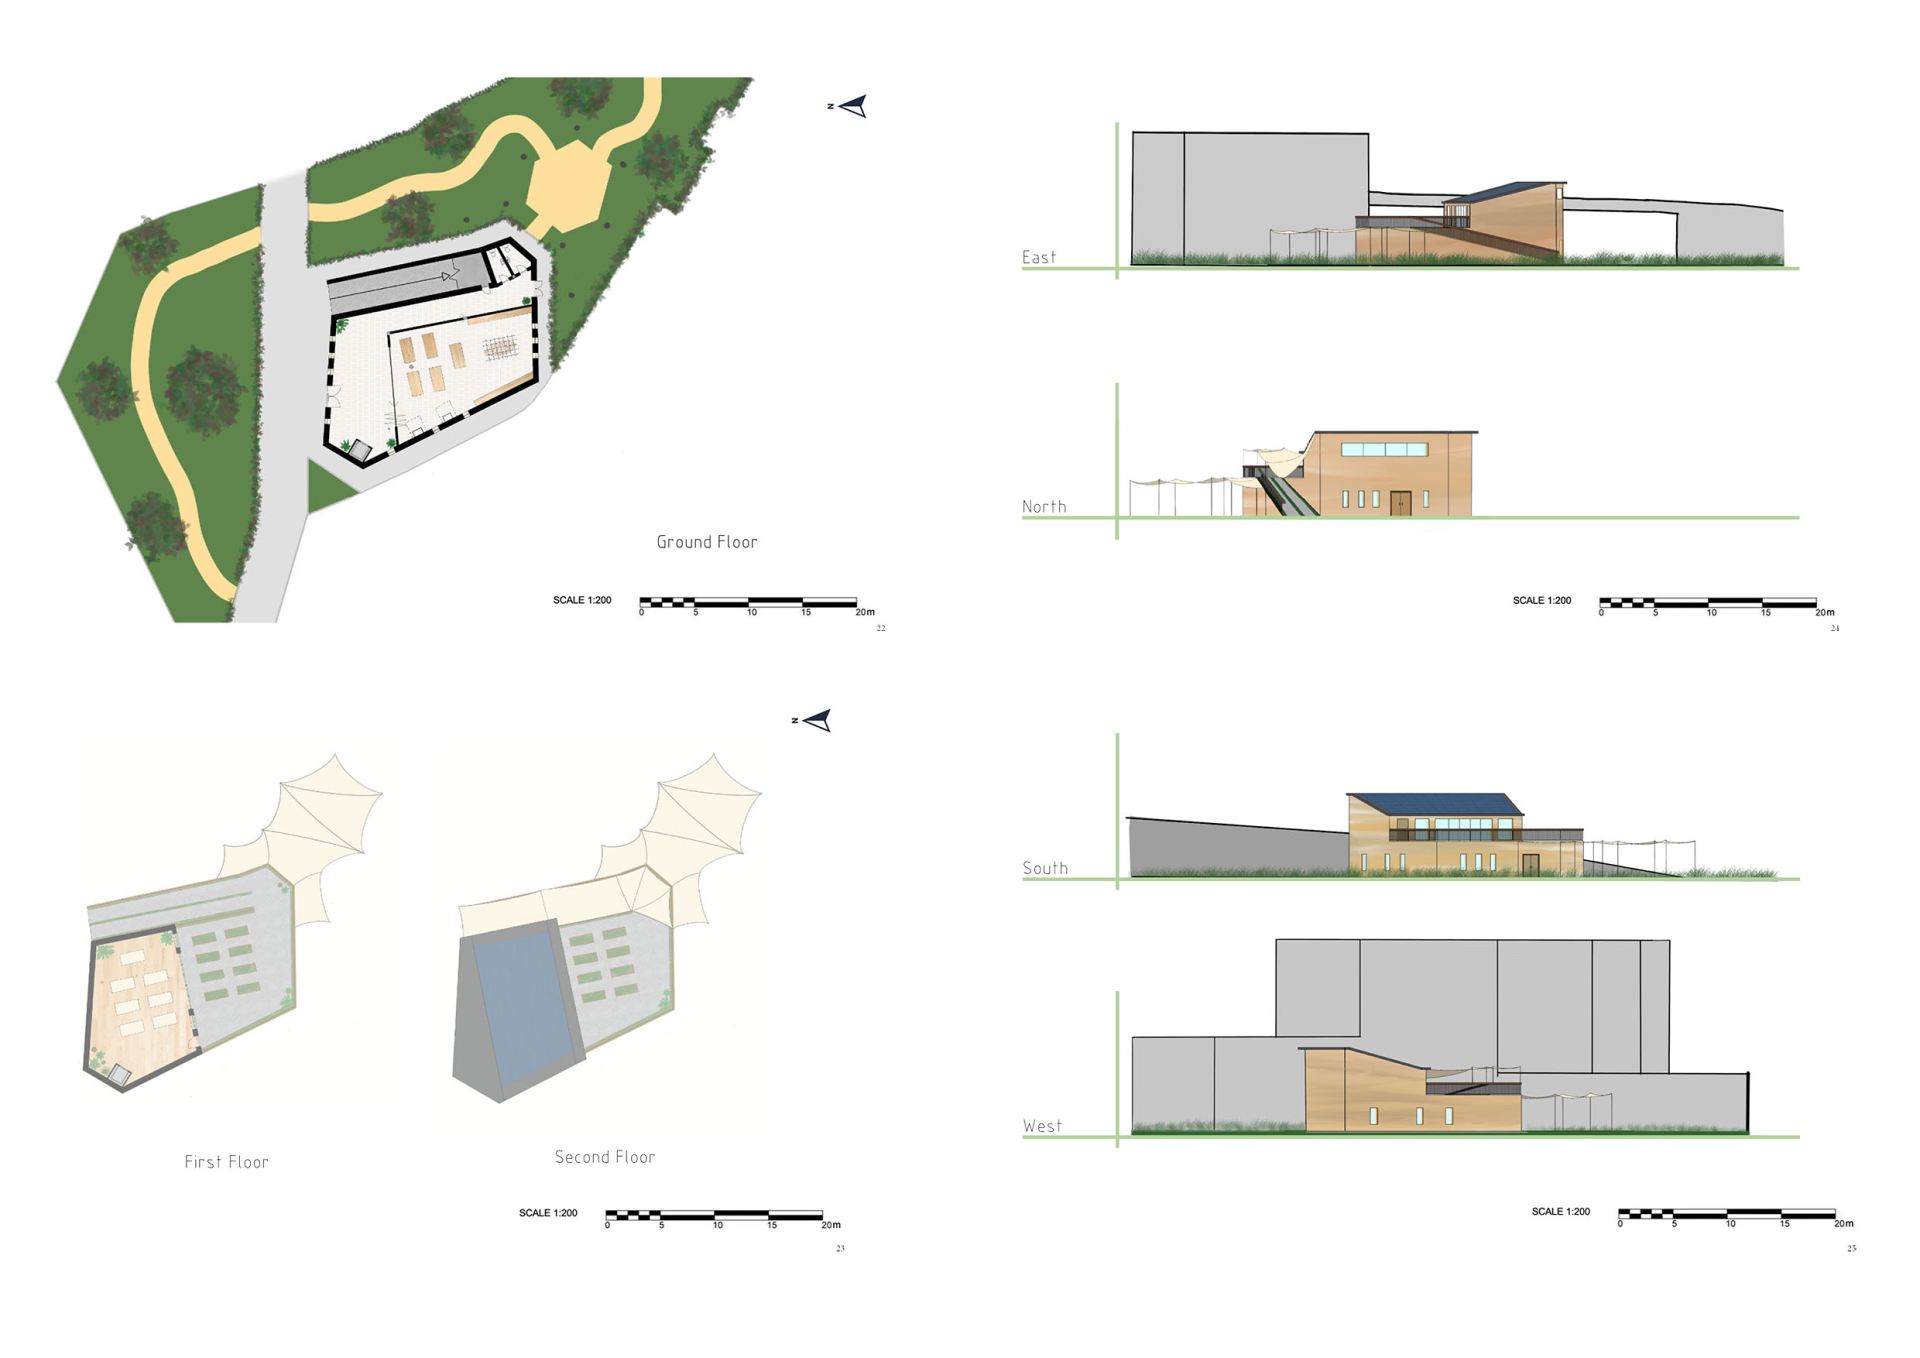 Final Plans and Sections, Gardening Community Center